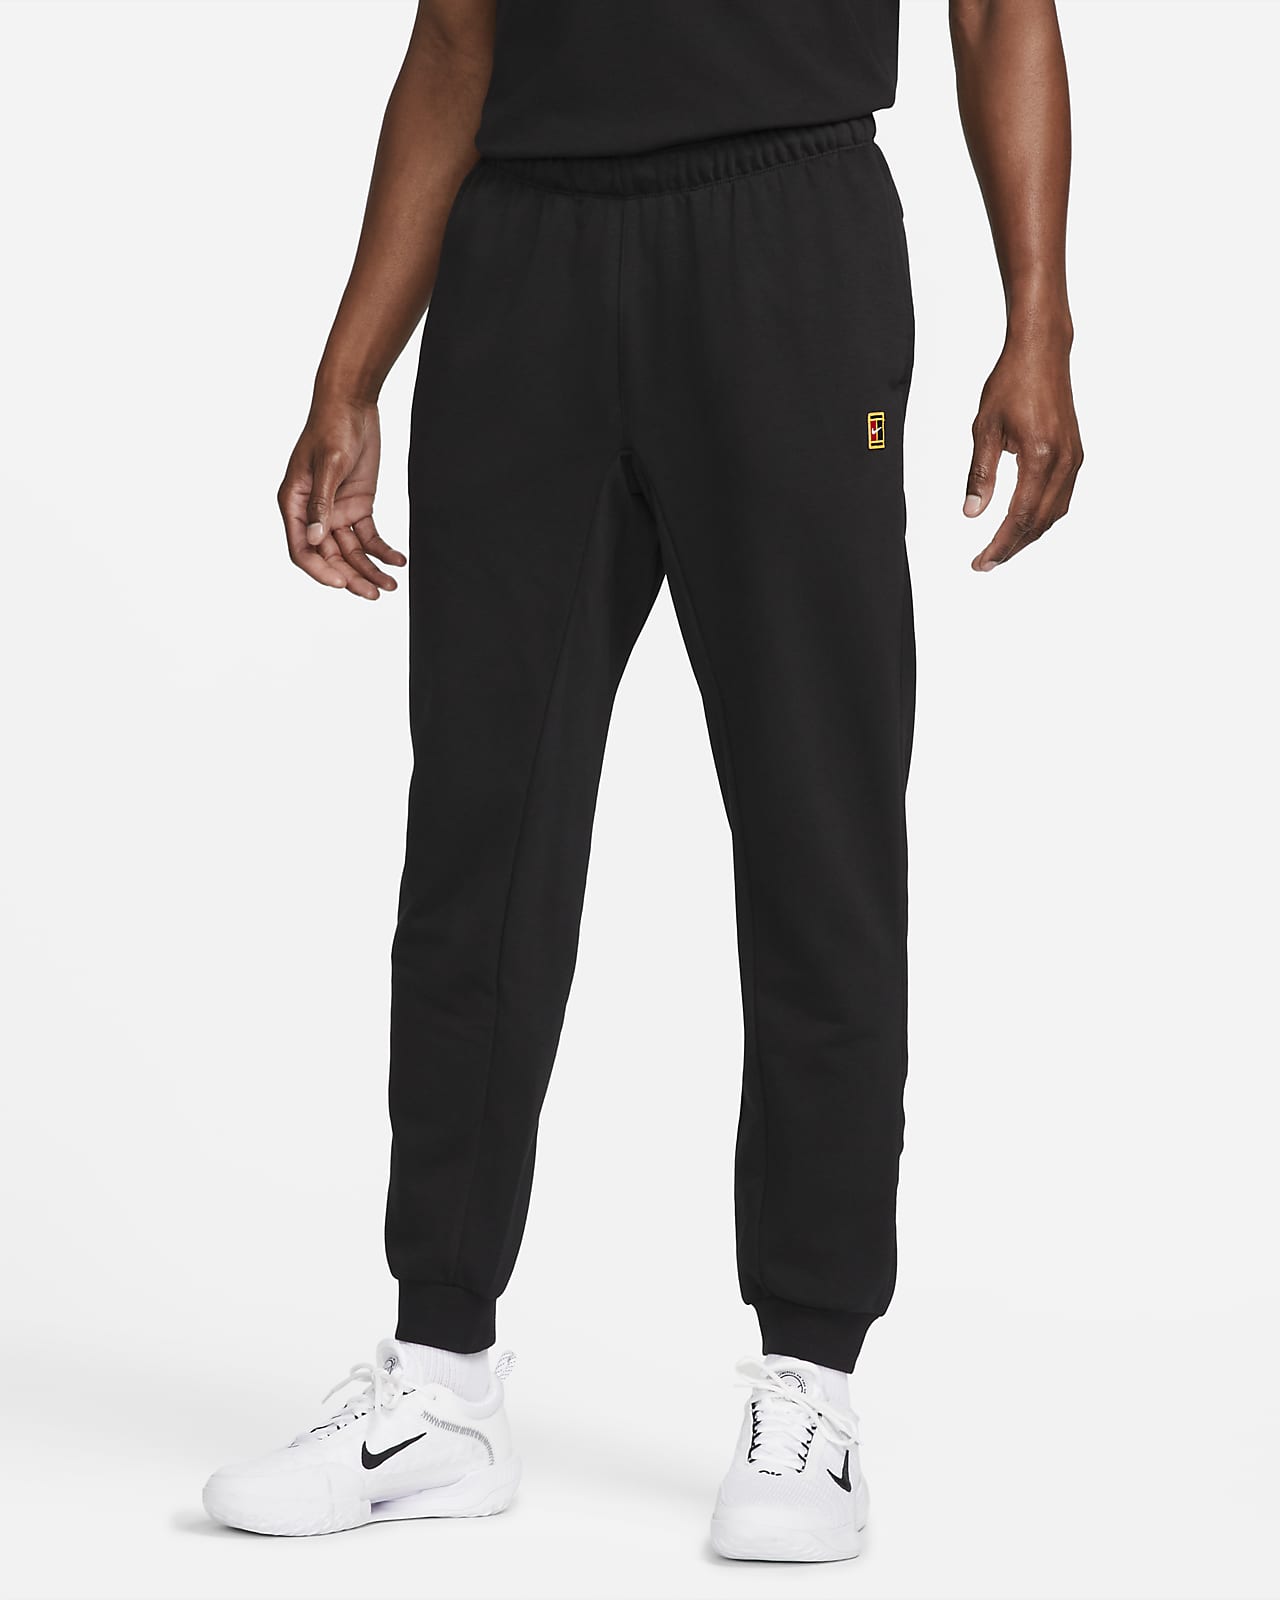 https://static.nike.com/a/images/t_PDP_1280_v1/f_auto,q_auto:eco/badf0d8e-8499-41af-aec3-ab21d05f0858/nikecourt-heritage-mens-french-terry-tennis-pants-tNjvPt.png